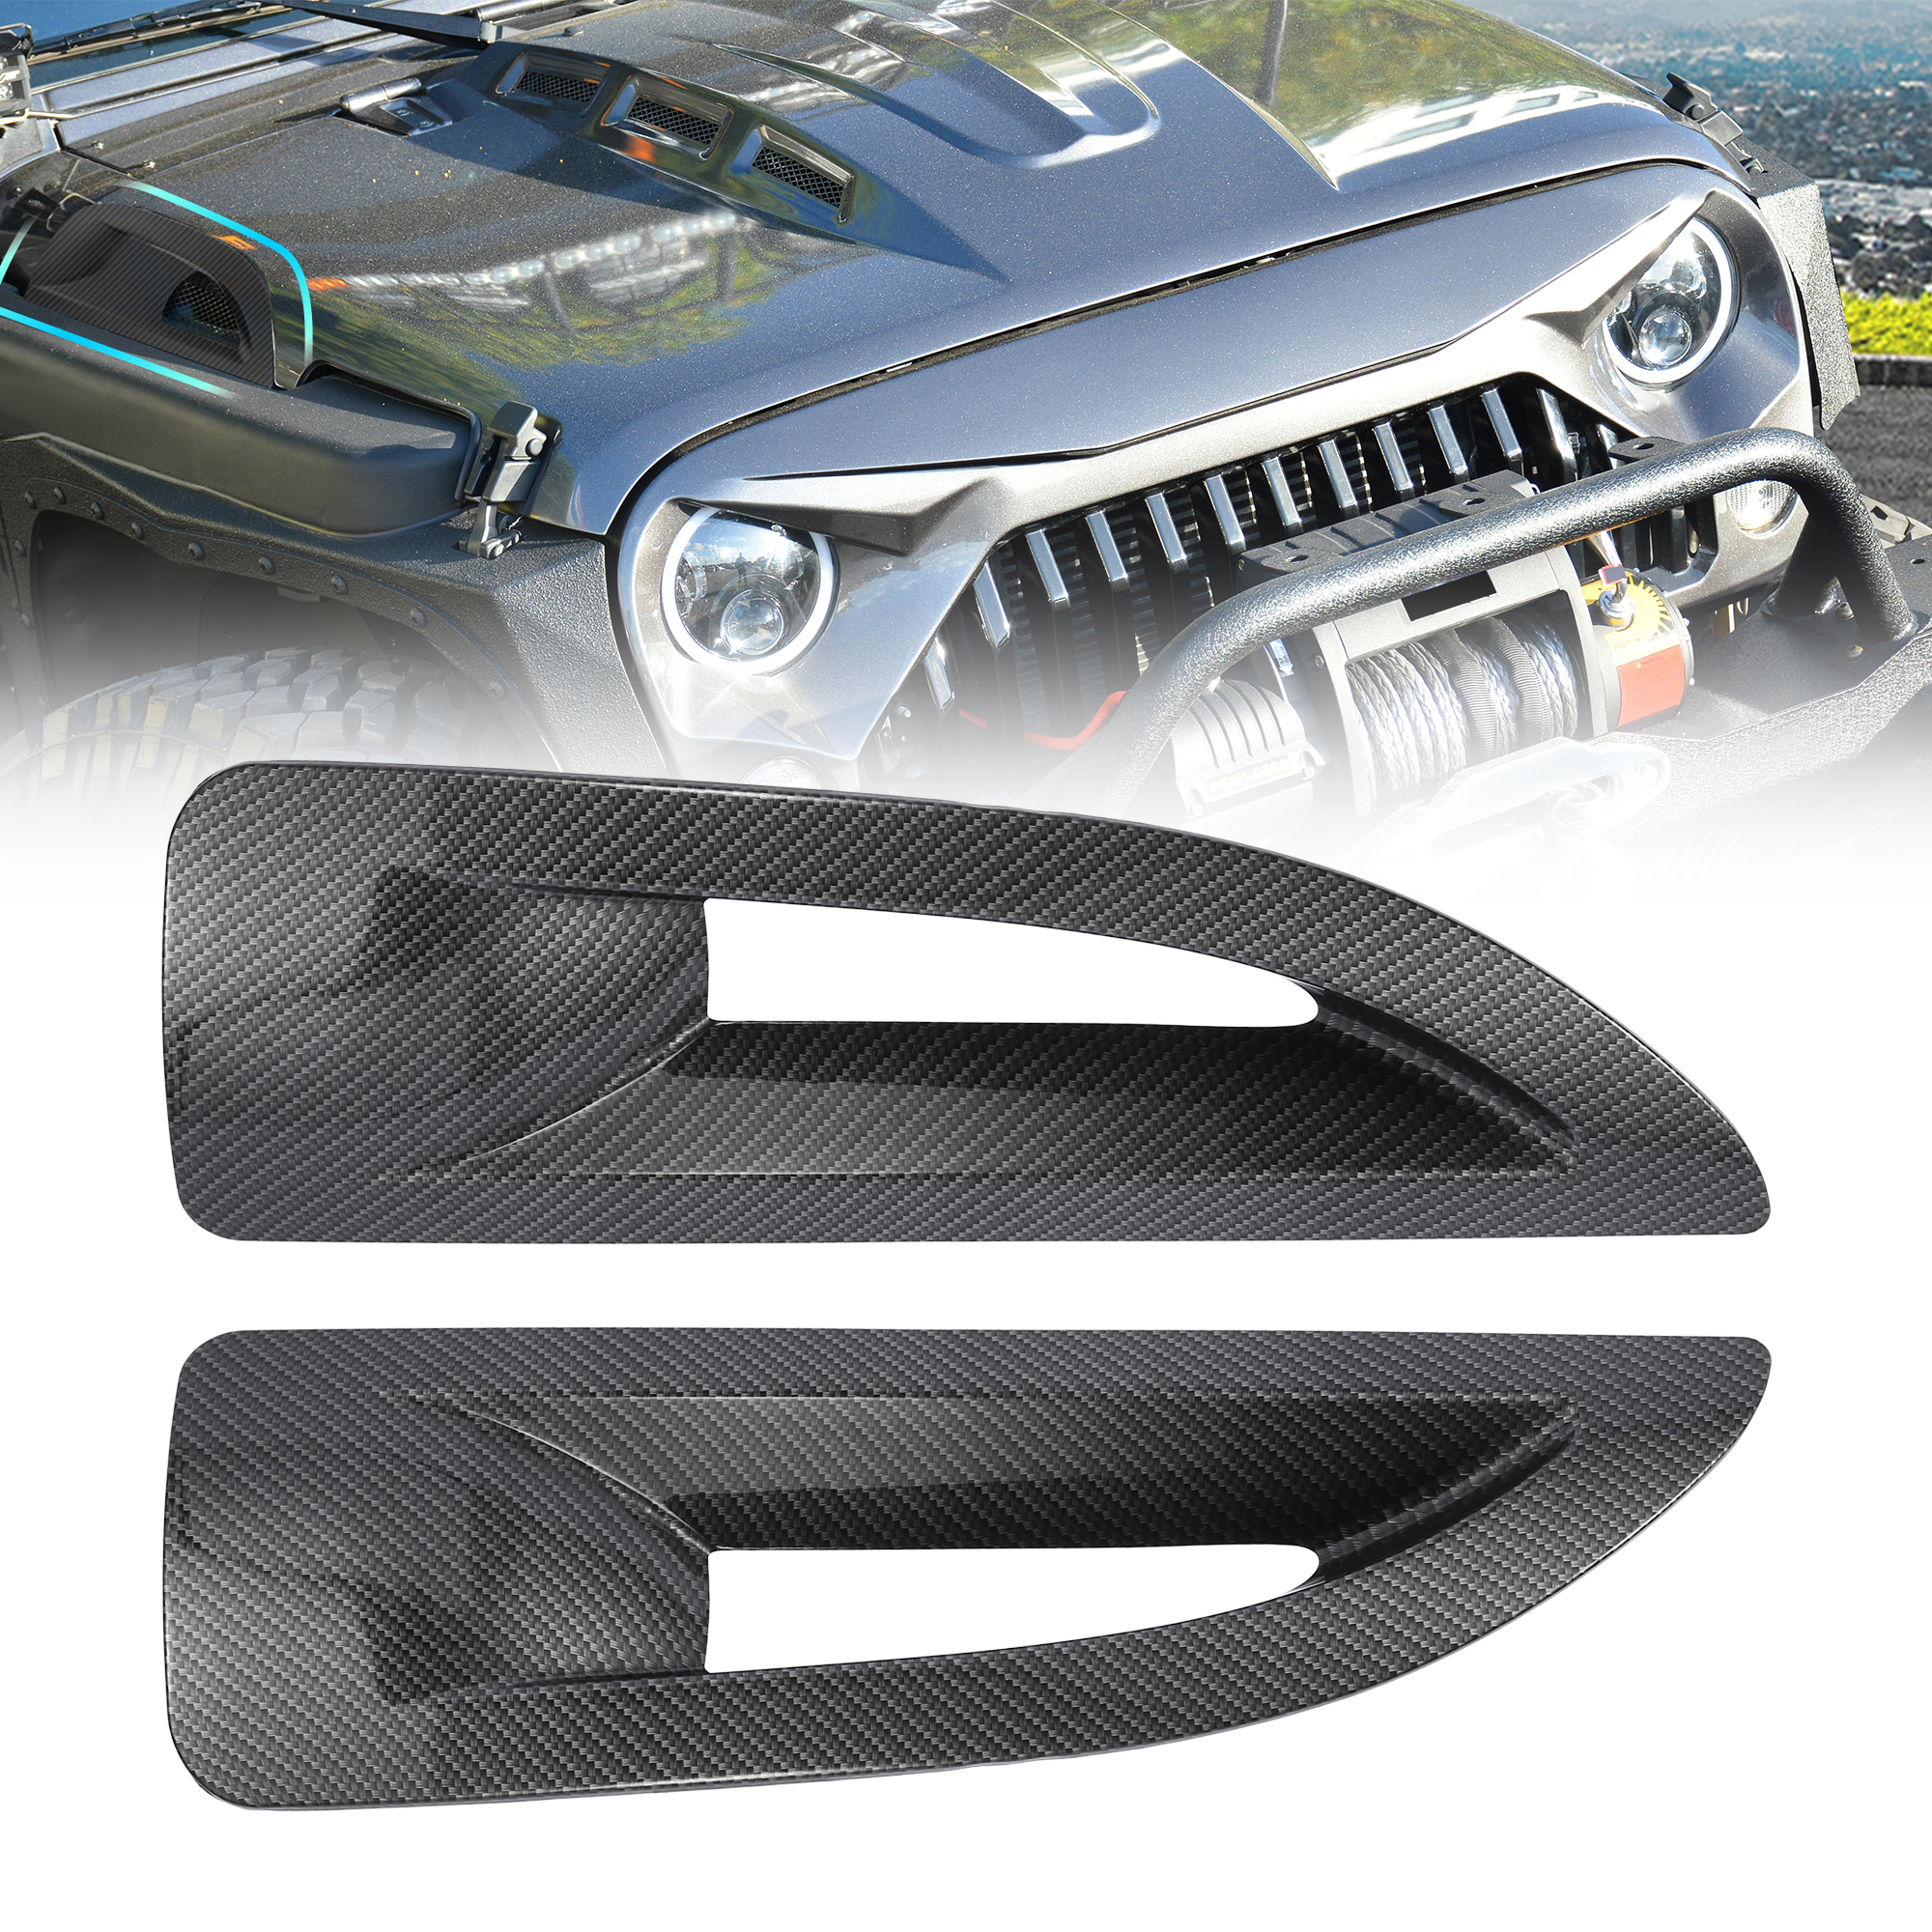 Unique Bargains Pair Hood Side Air Vent Cover for Jeep Wrangler JK JKU Unlimited Rubicon 07-17